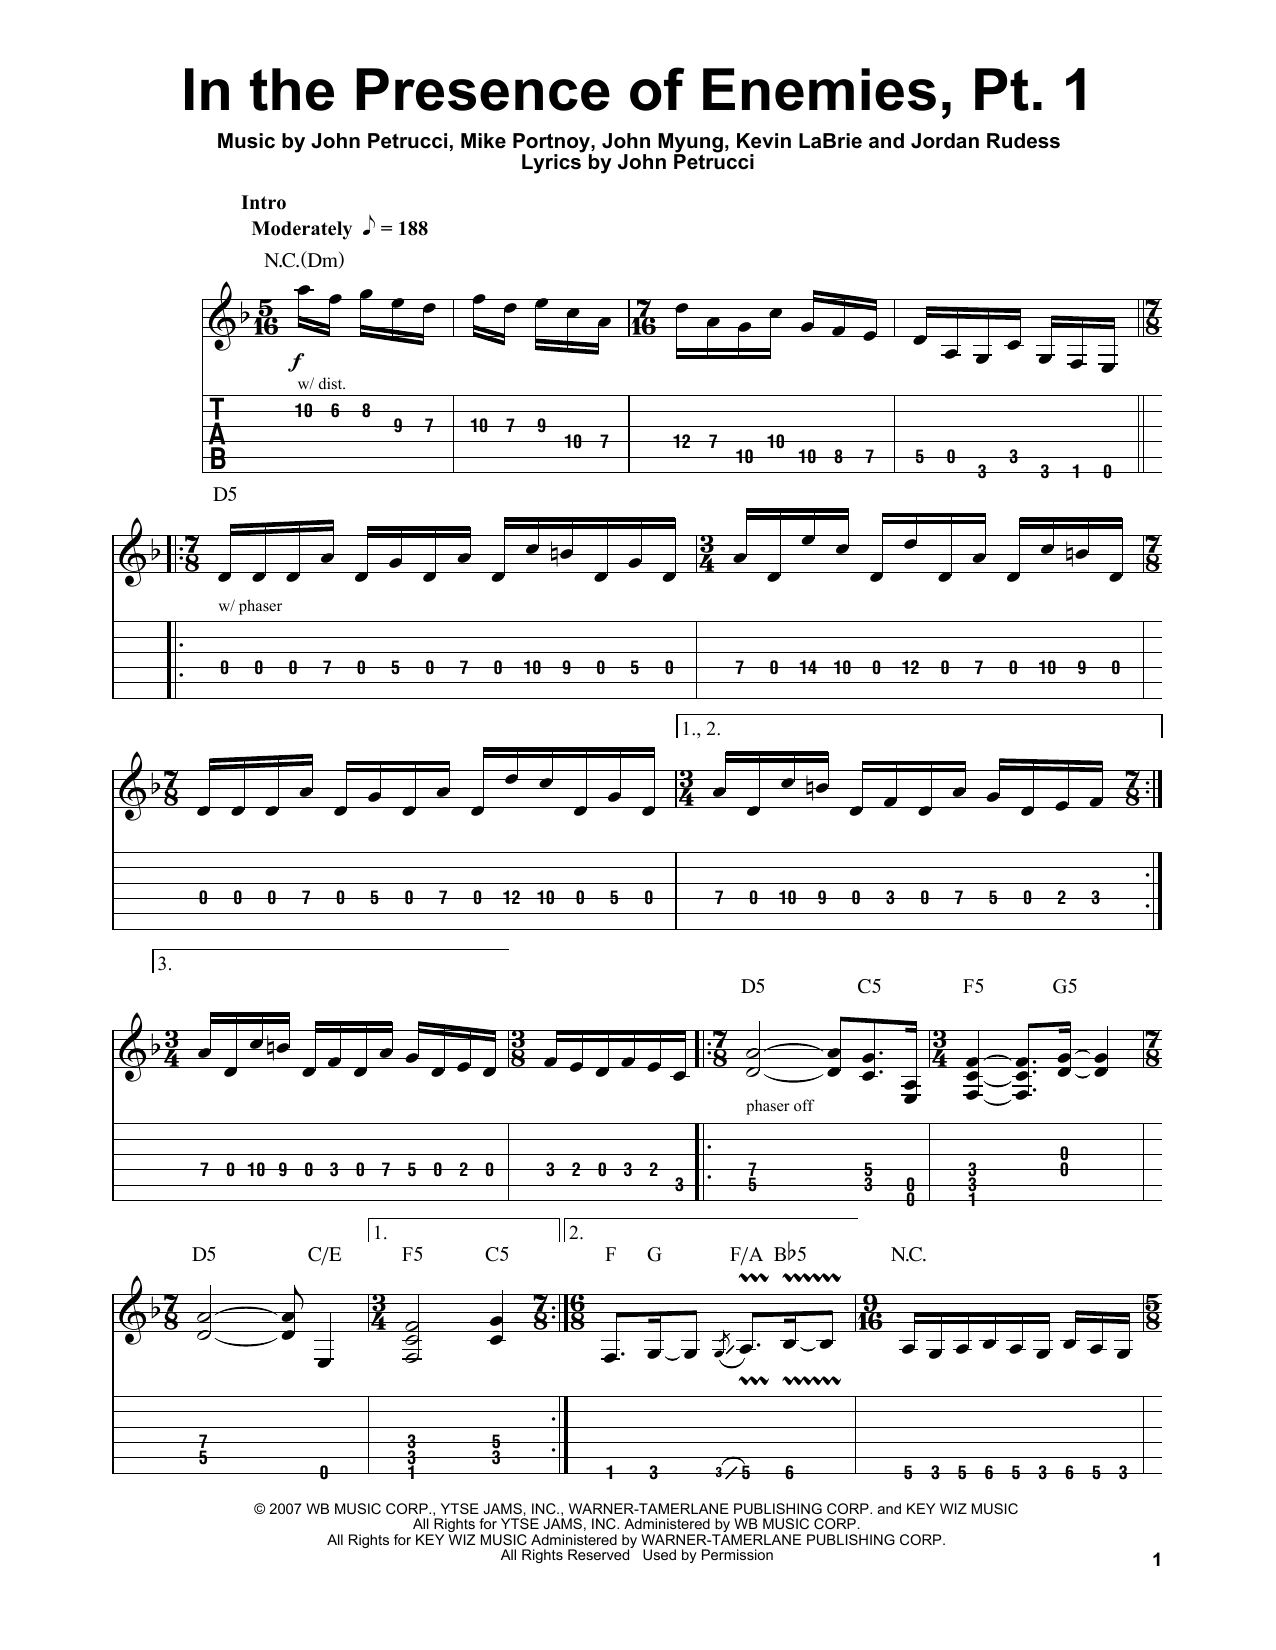 Dream Theater In The Presence Of Enemies - Part 1 sheet music notes and chords. Download Printable PDF.